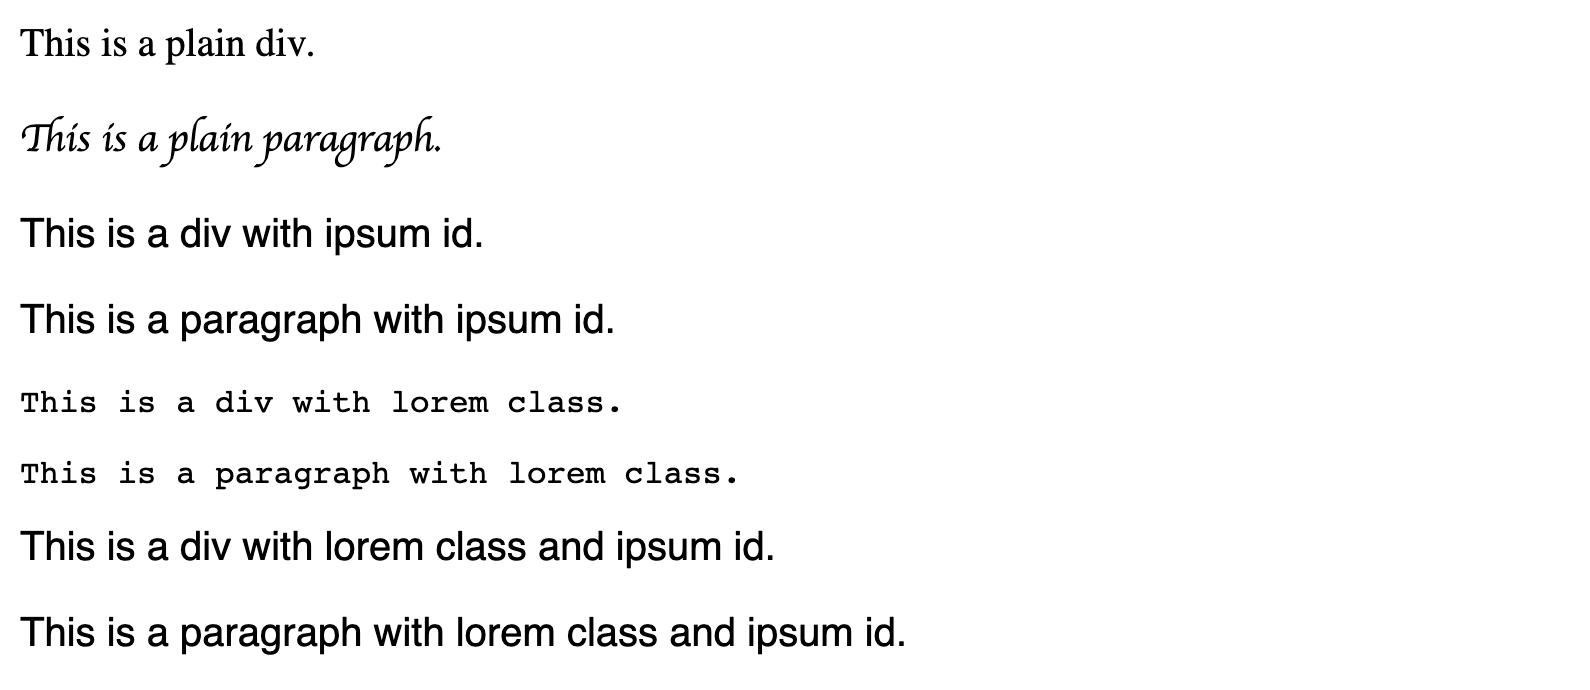 HTML rendering illustrating relative specificity of tags, classes, and ids.